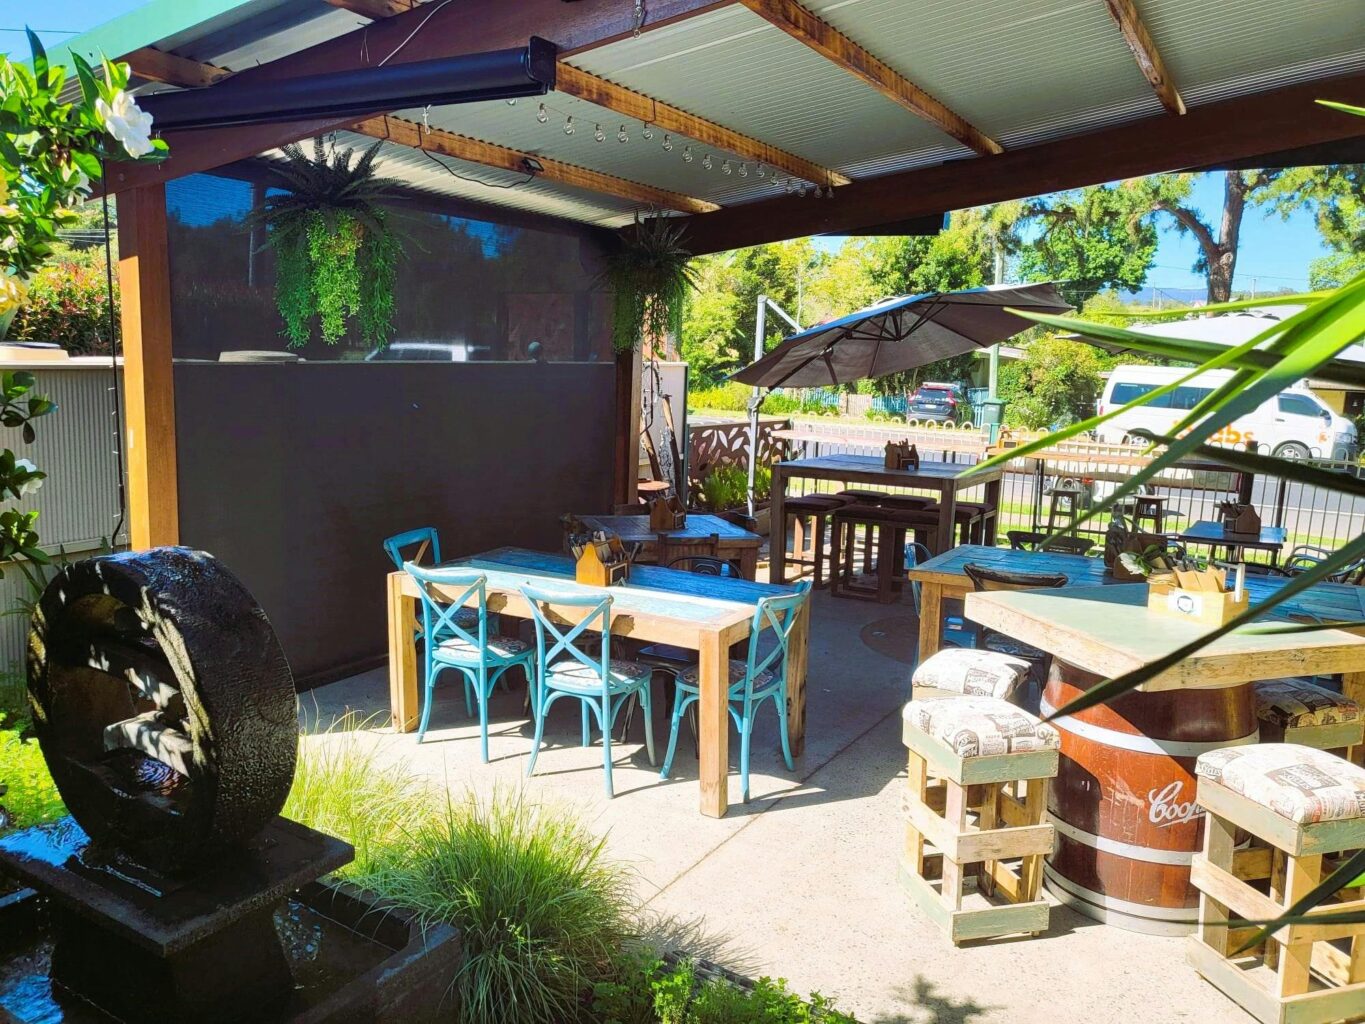 Undercover dining in the courtyard with garden and water feature.  Dog friendly seating.